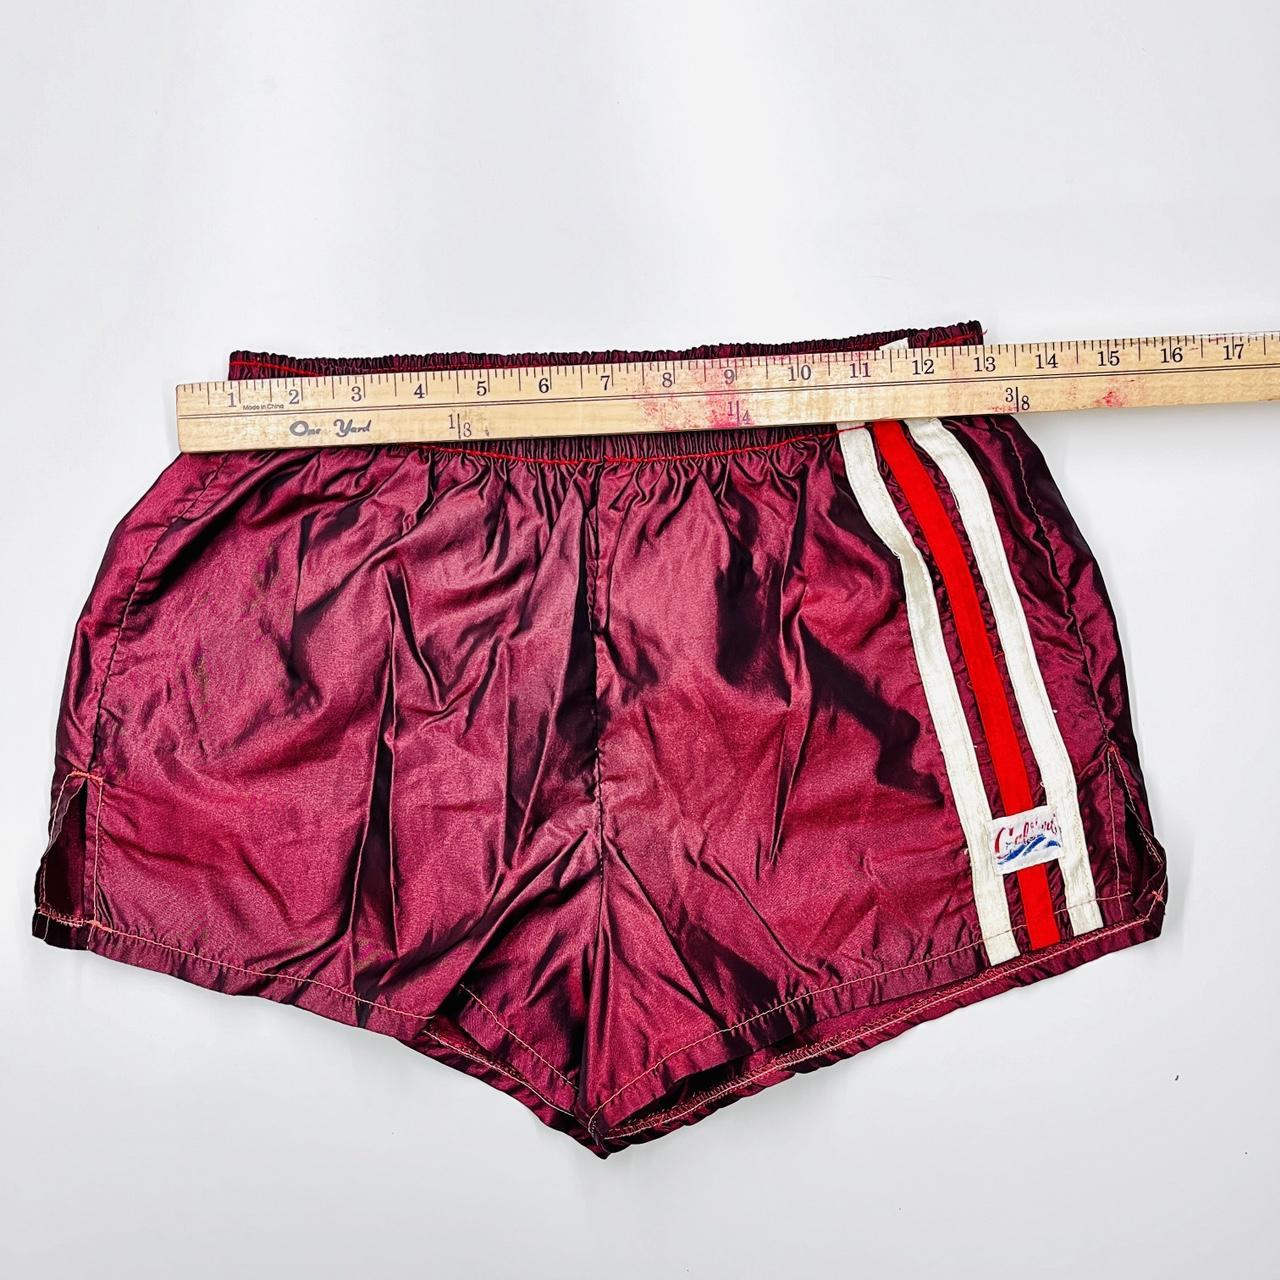 California Waves Women's Burgundy and Red Shorts (5)